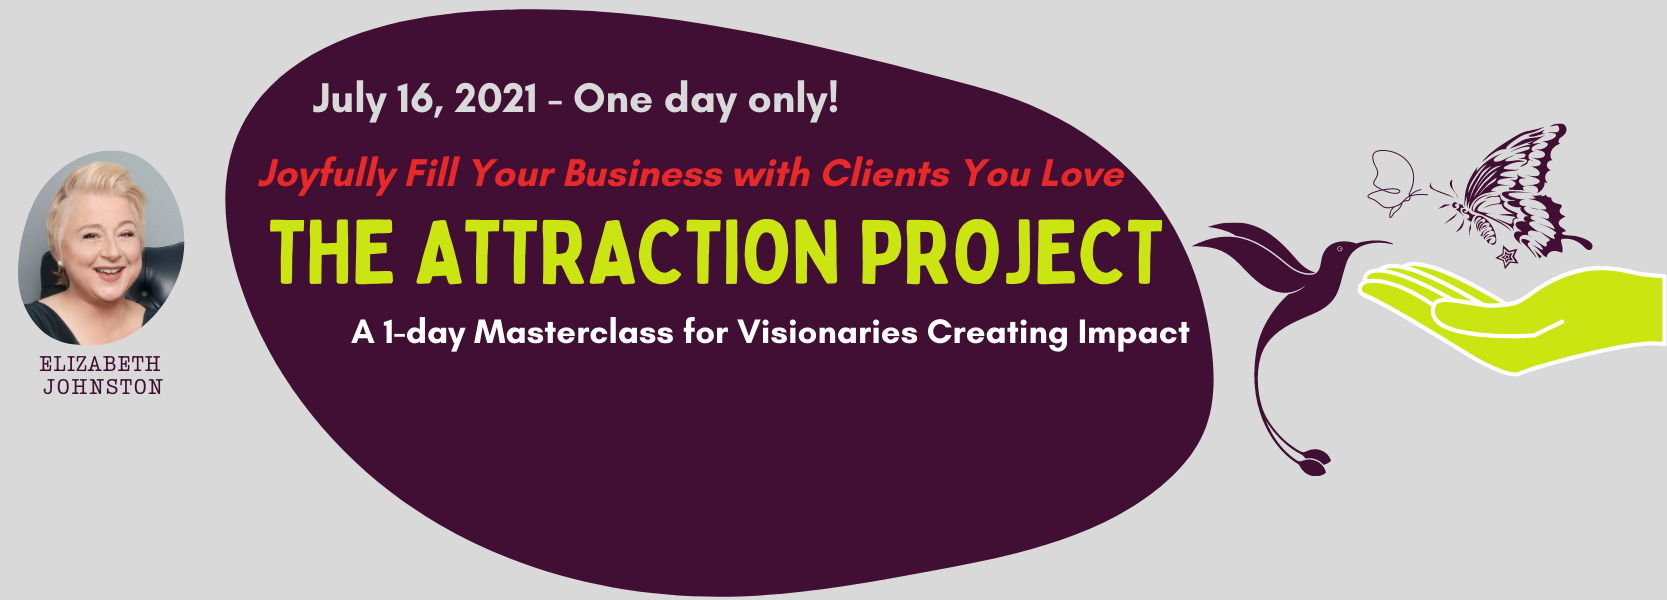 The Attraction Project for Visionaries Creating Impact